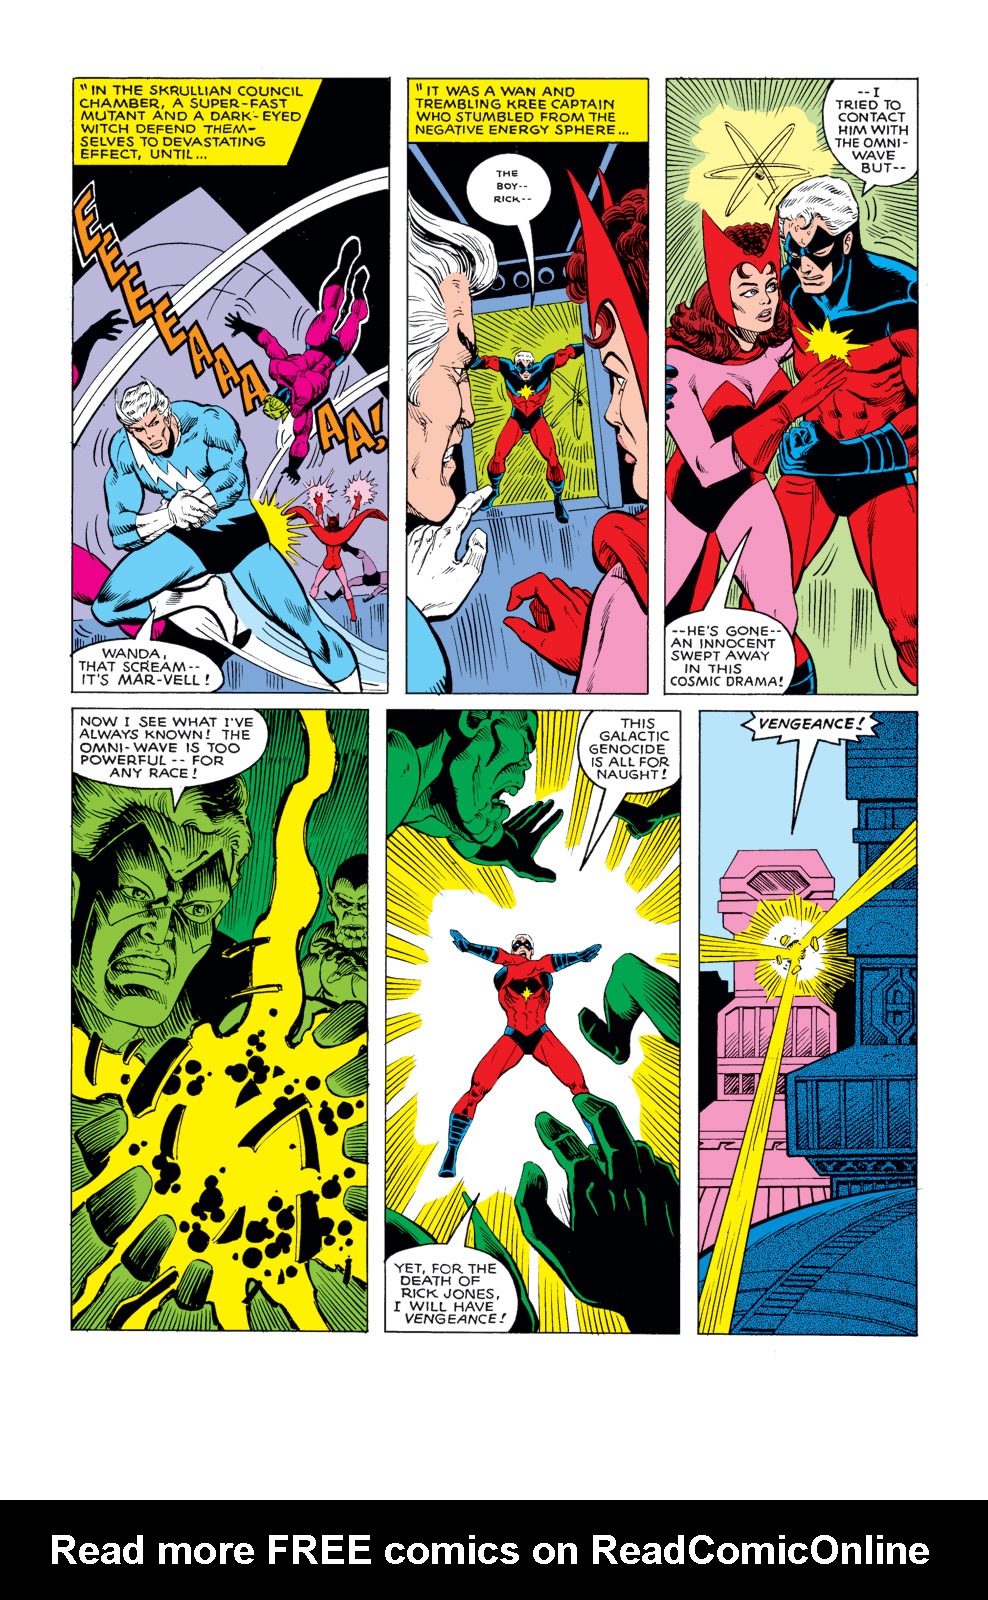 What If? (1977) issue 20 - The Avengers fought the Kree-Skrull war without Rick Jones - Page 13